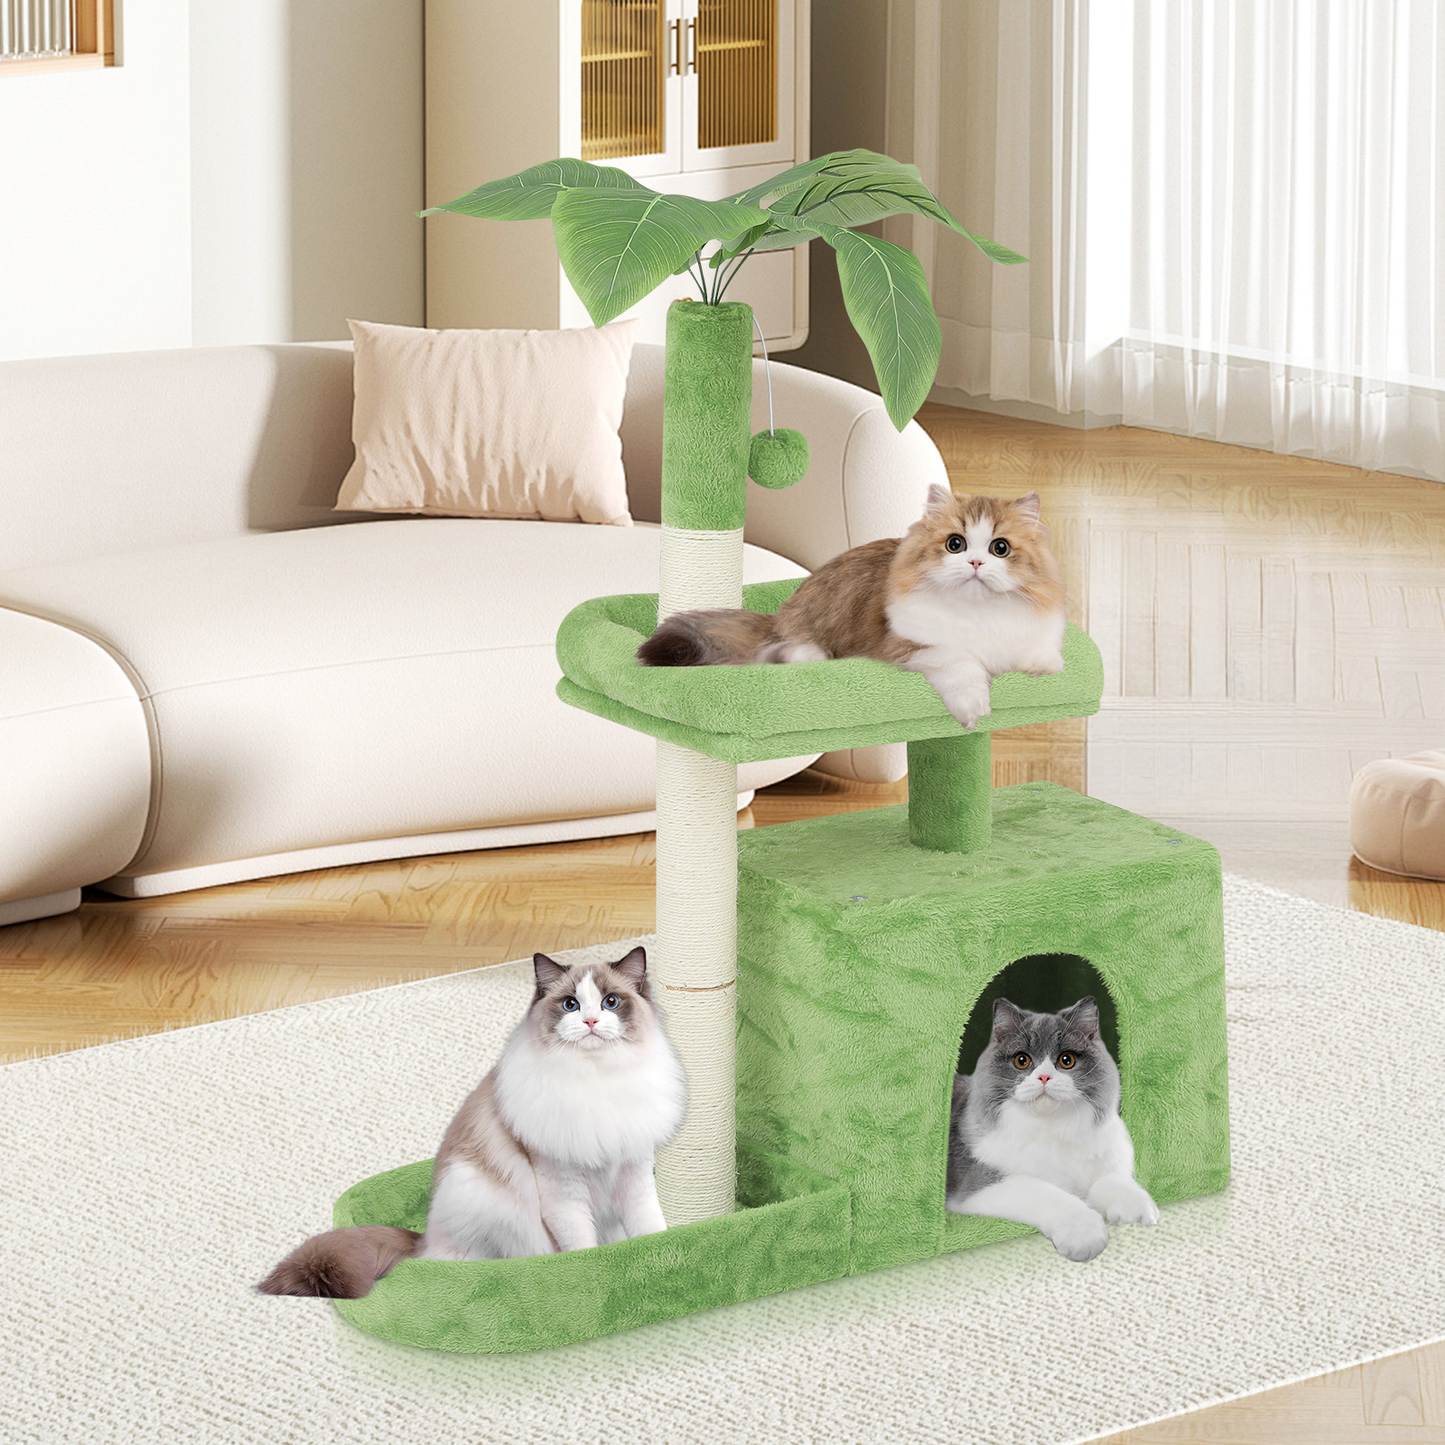 32" Height Cat Tree -Leaves Design - Lawn Green